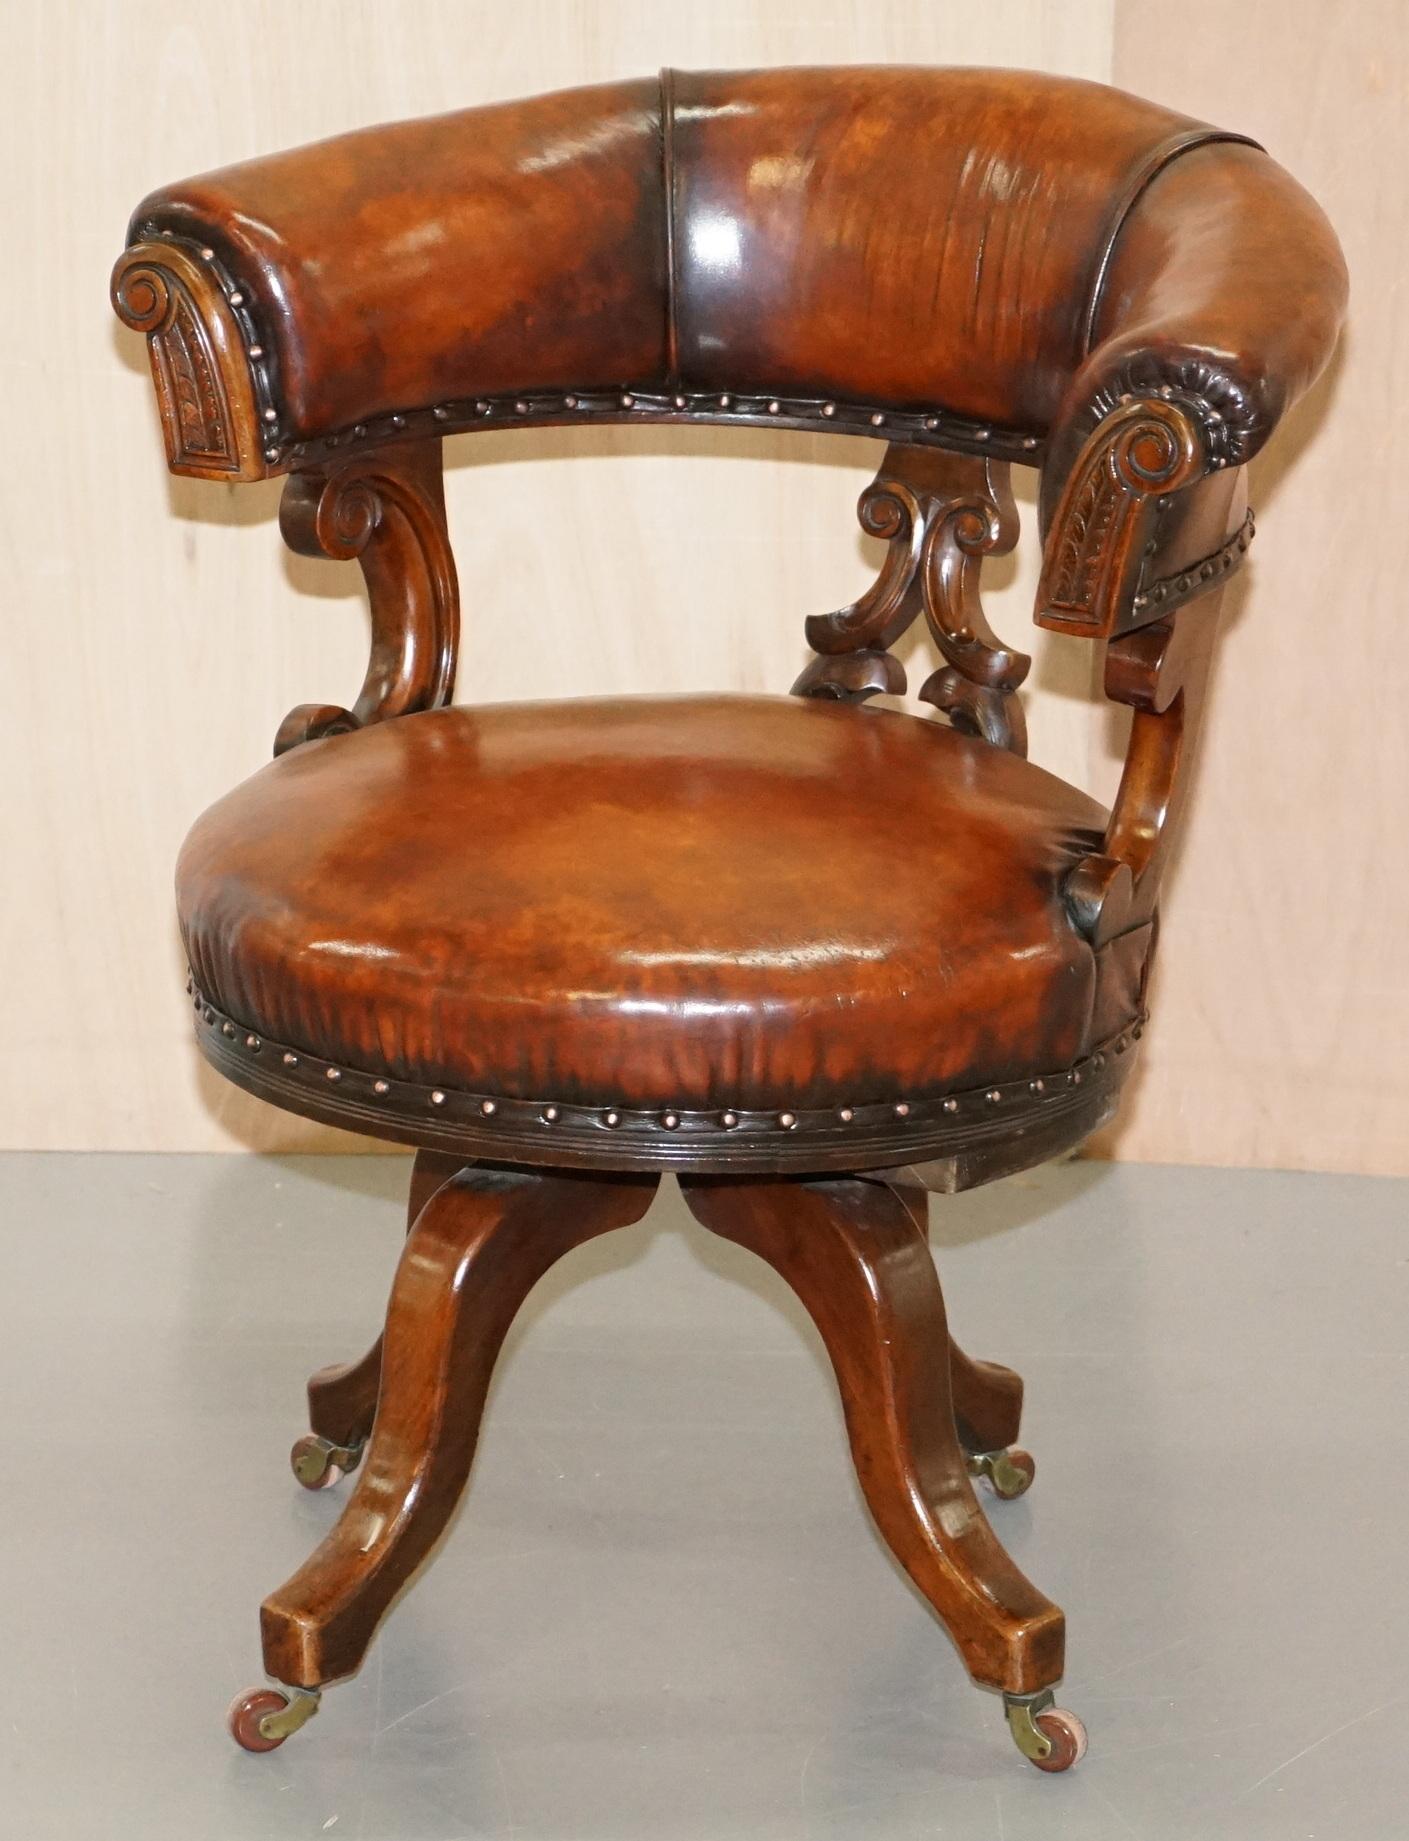 We are delighted to offer for sale this absolutely stunning fully restored hand dyed aged brown leather early Victorian ships captains chair

This chair is just about as fine as you find anywhere, it has been reupholstered with premium natural